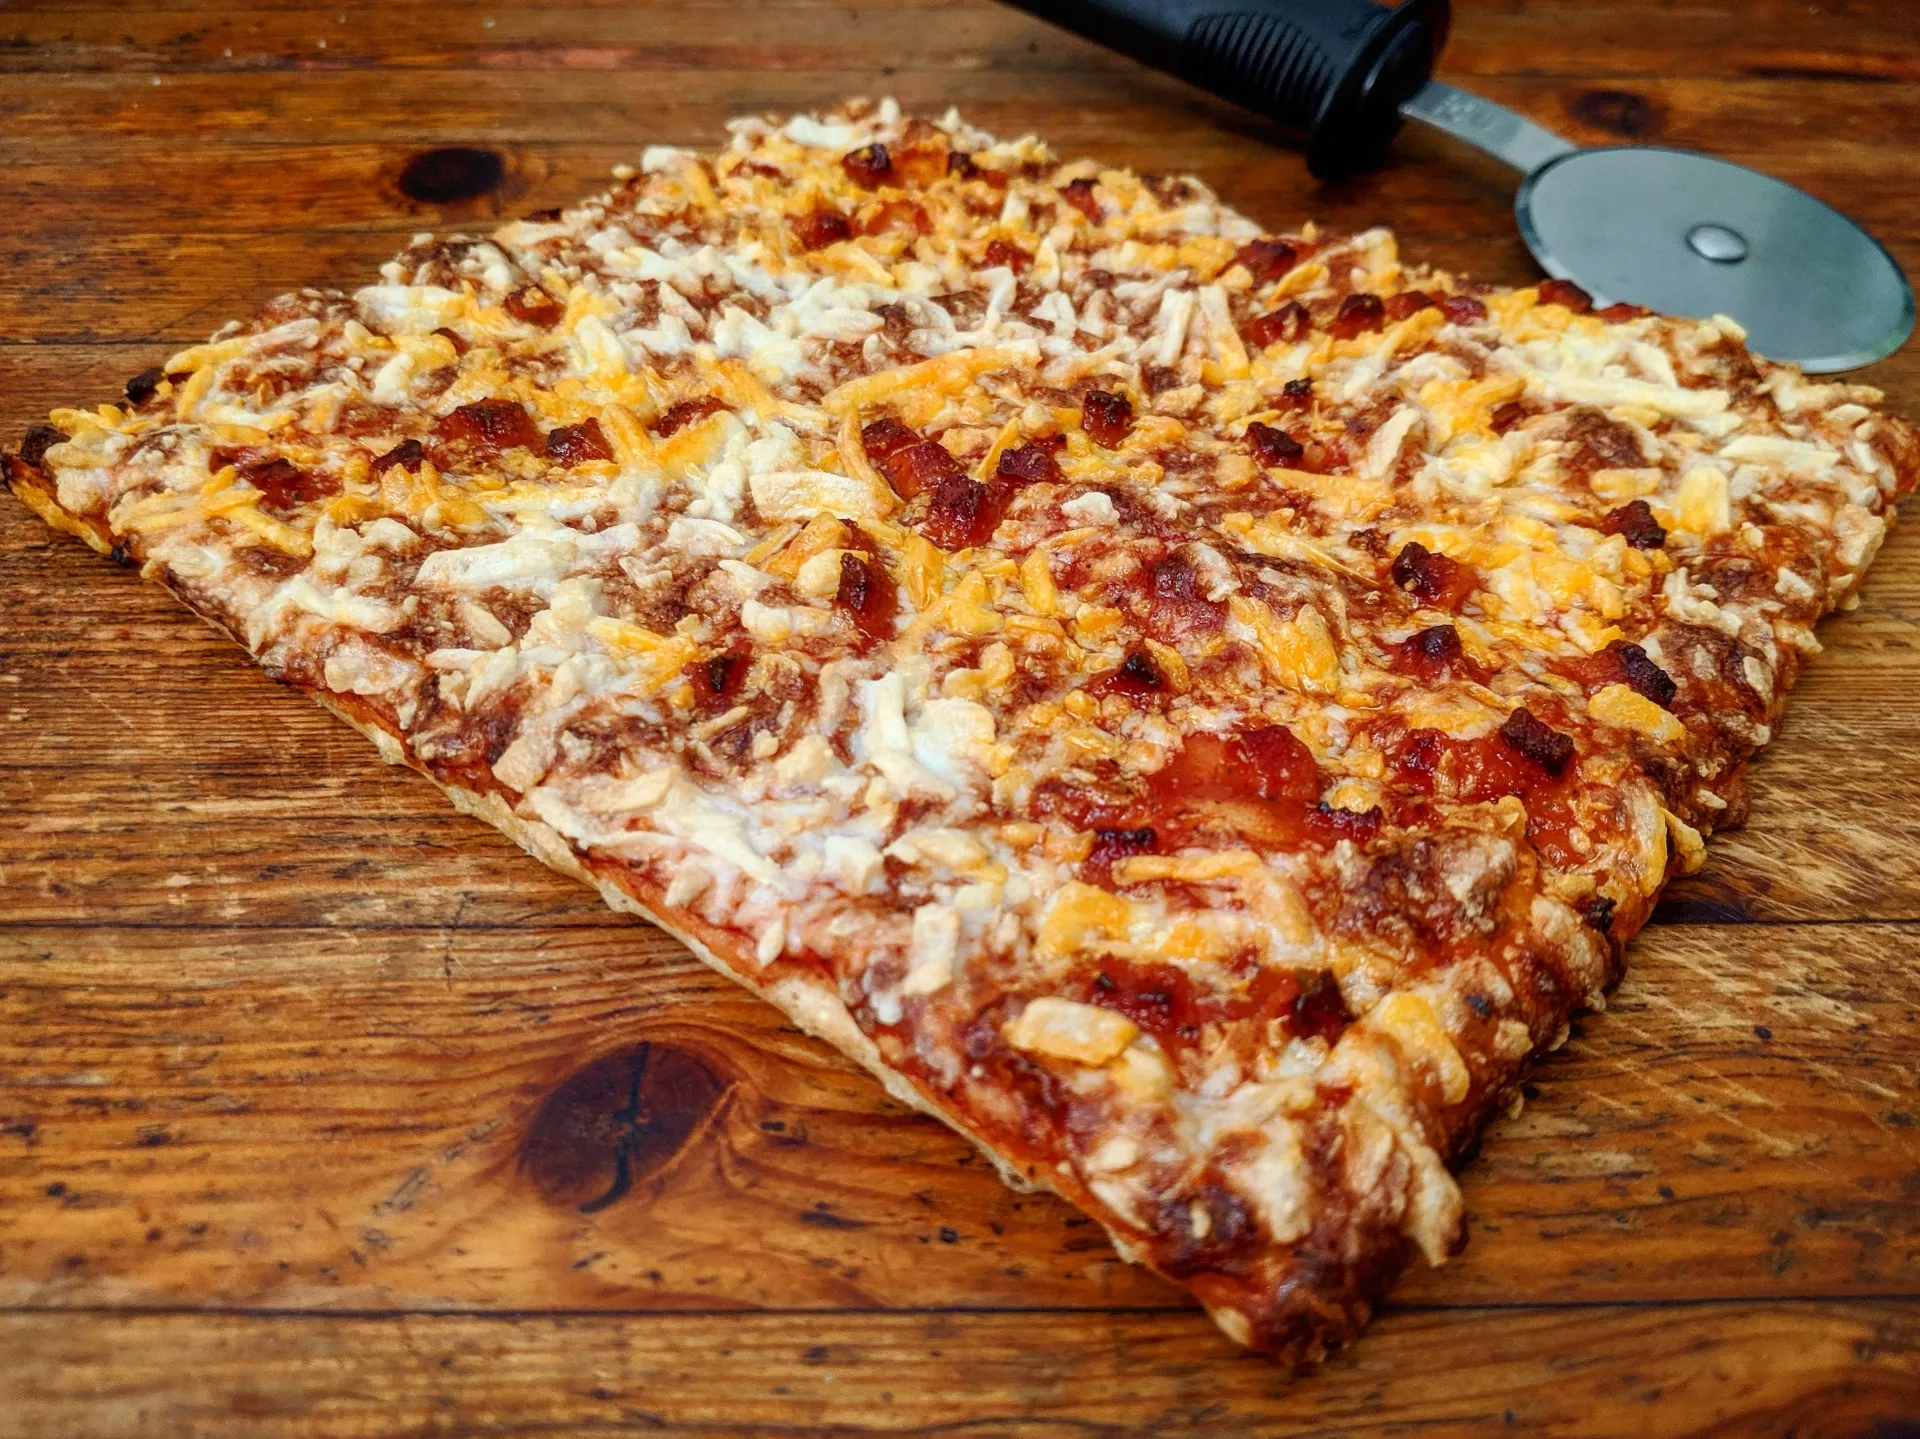 Perfectly Crispy and Delicious: How to Cook Totino’s Pizza in an Air Fryer Oven